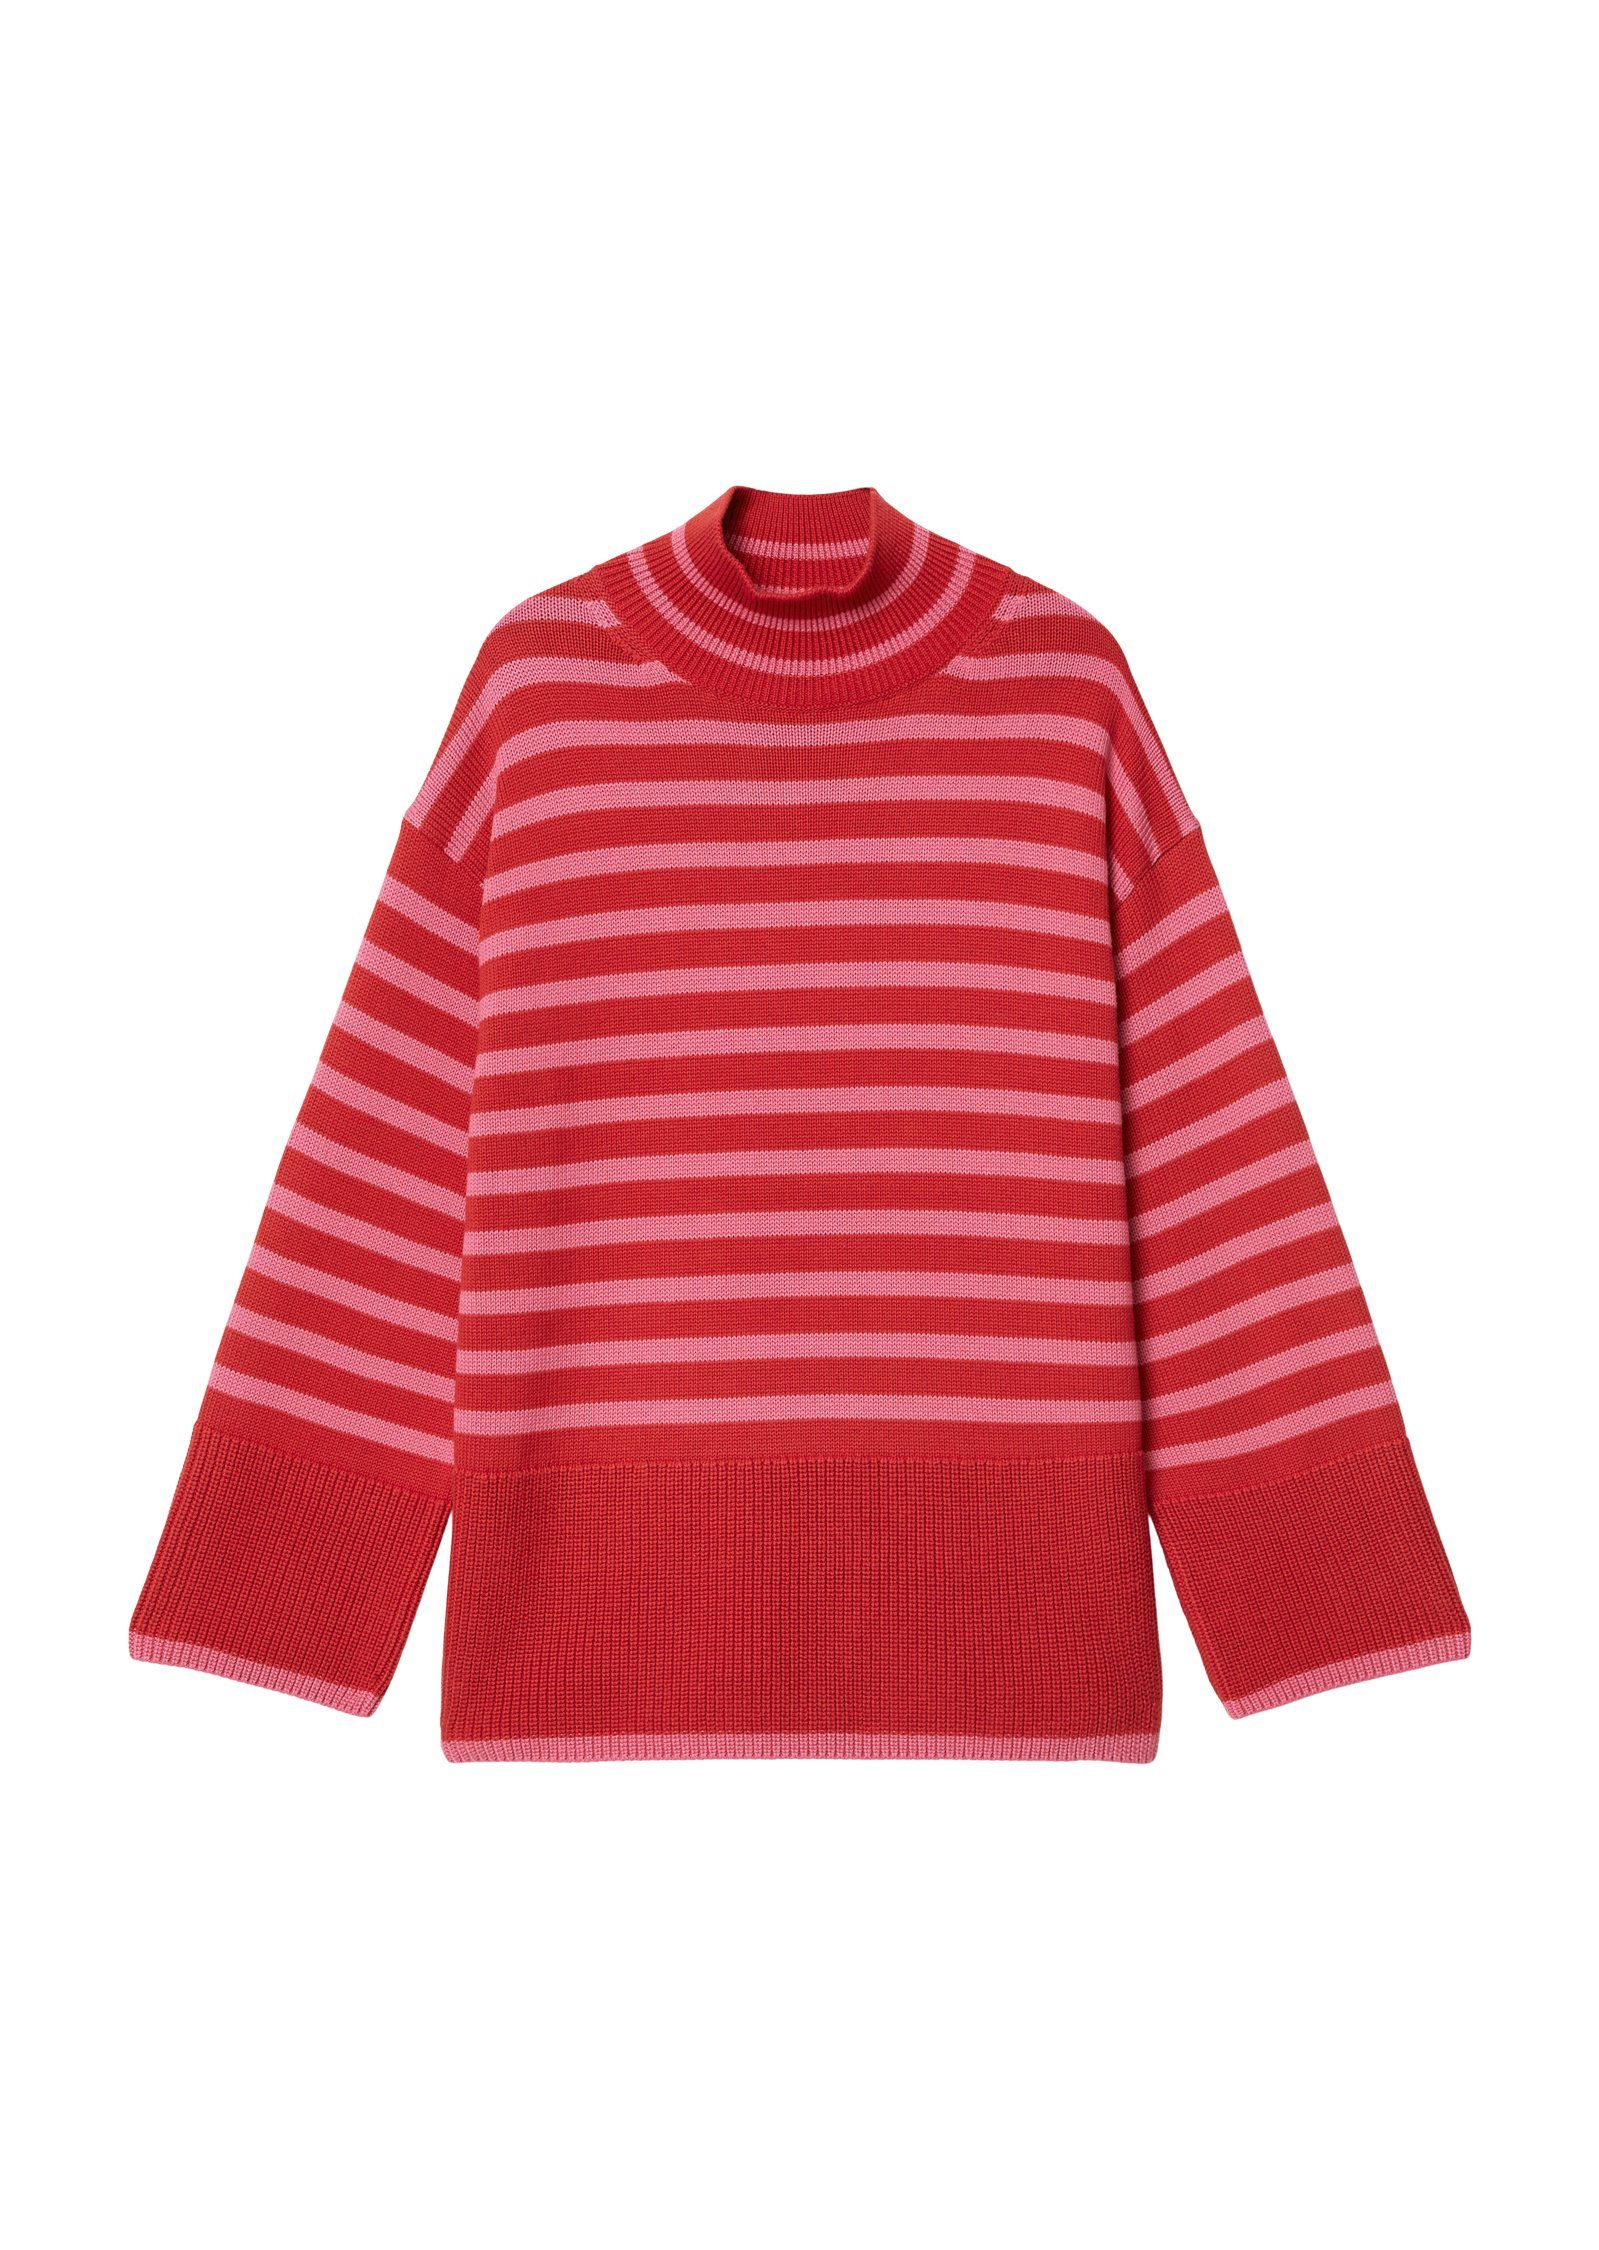 Marc O'Polo Strickpullover oversized red multi/shiny